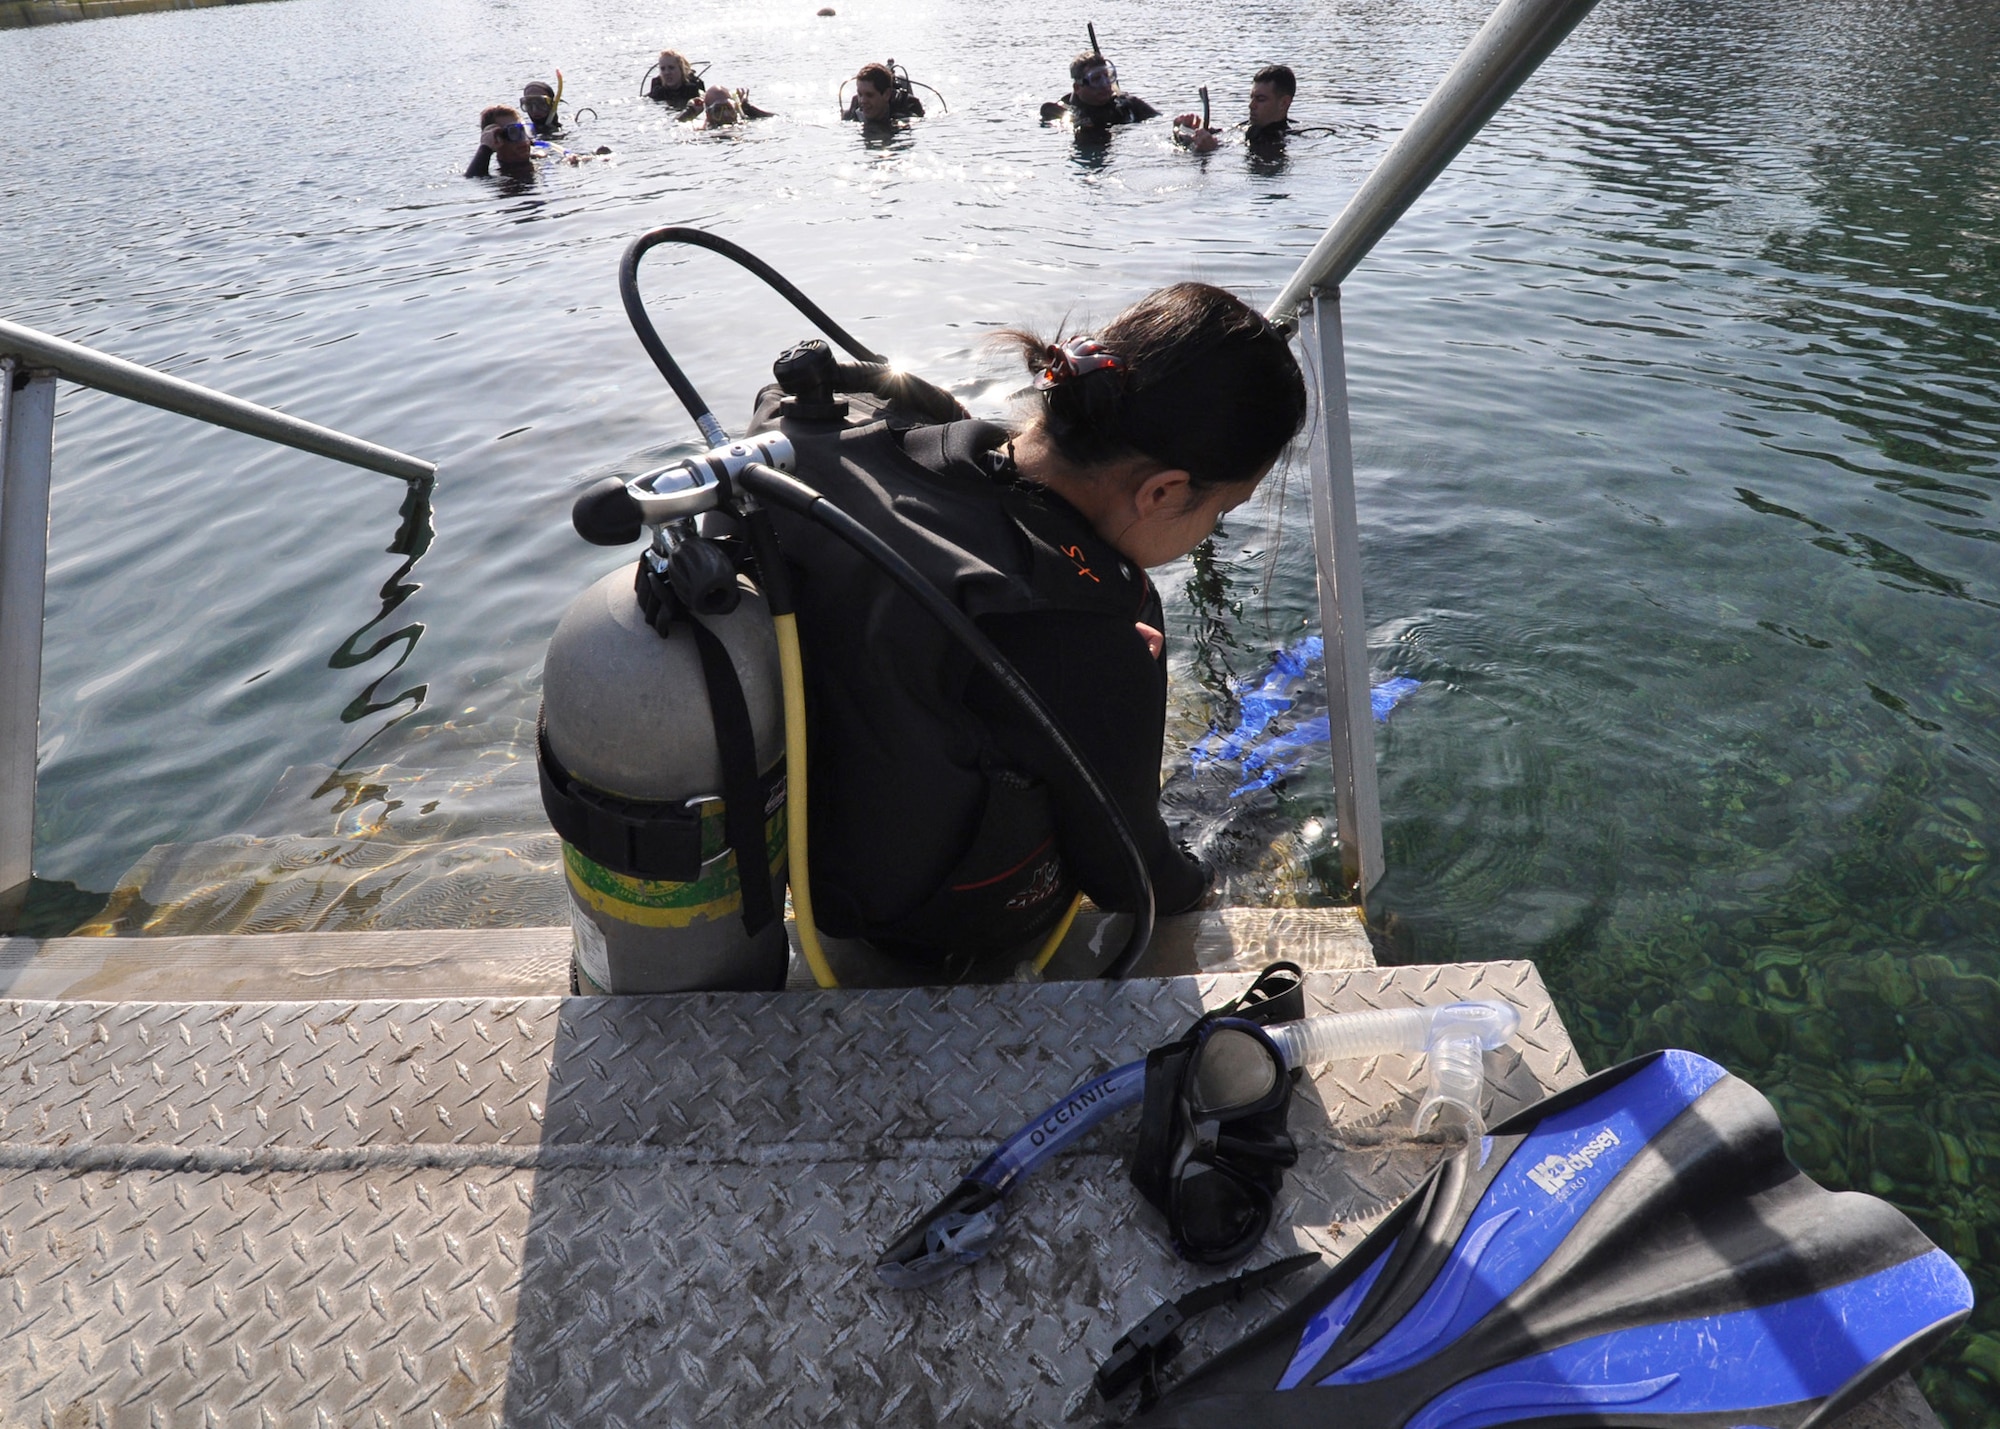 Angela Sangalang, a divemaster in training, puts on her fins before joining the group for their first deep-water dive during Day 3 of the certification course taught here at Eglin.  The class is four days over two weekends and it occurs once a month.  After taking the course, students will be certified to dive in up to 60 feet of water.  Anyone interested in attending the class, can call 850-217-1261.  (U.S. Air Force photo/Samuel King Jr.)